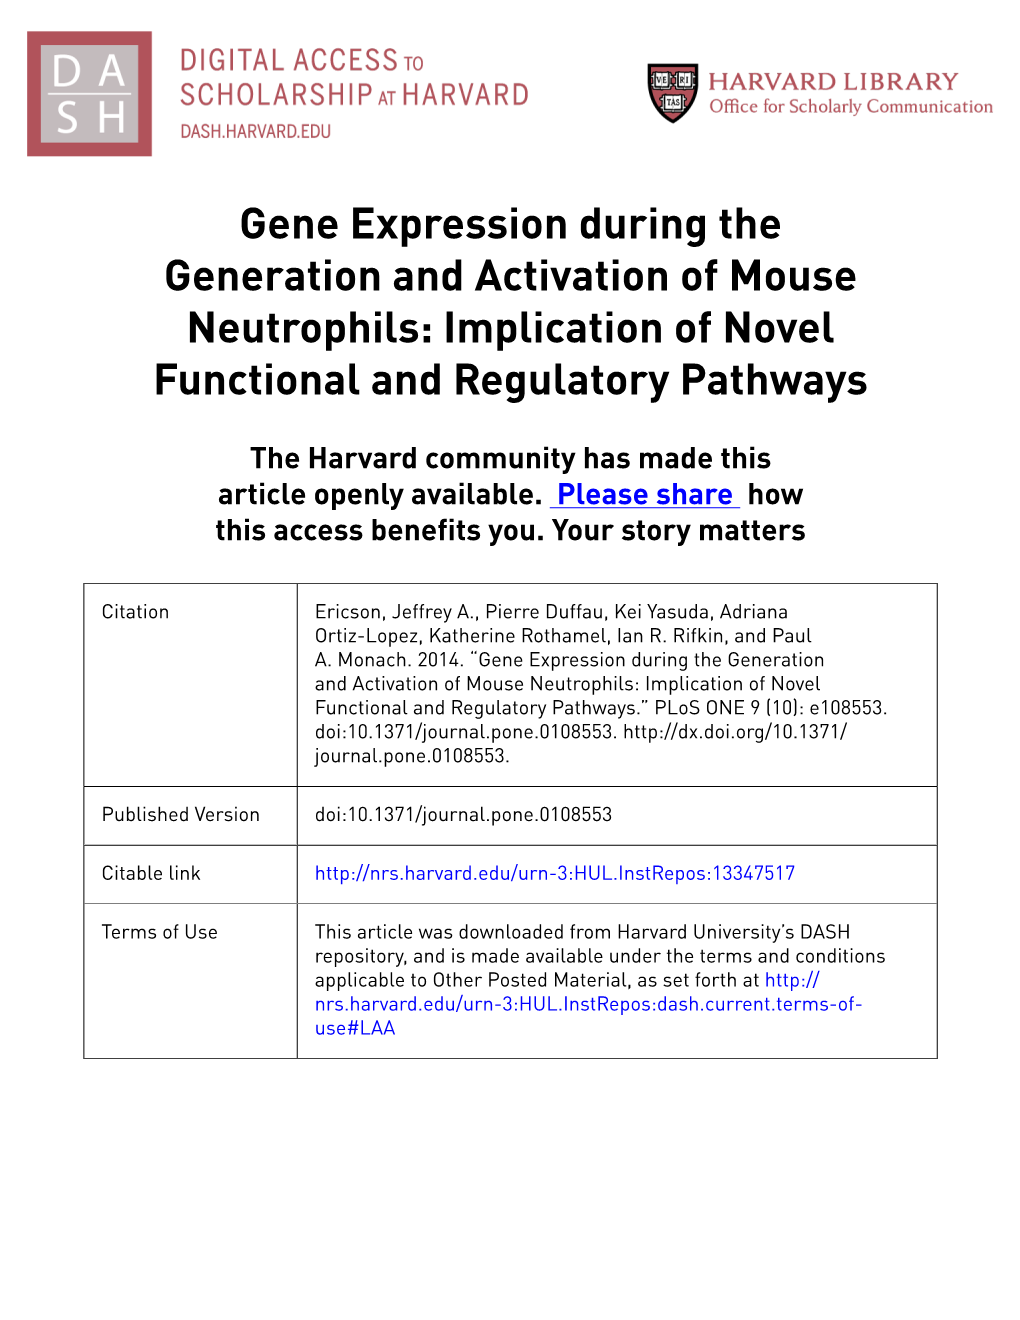 Gene Expression During the Generation and Activation of Mouse Neutrophils: Implication of Novel Functional and Regulatory Pathways